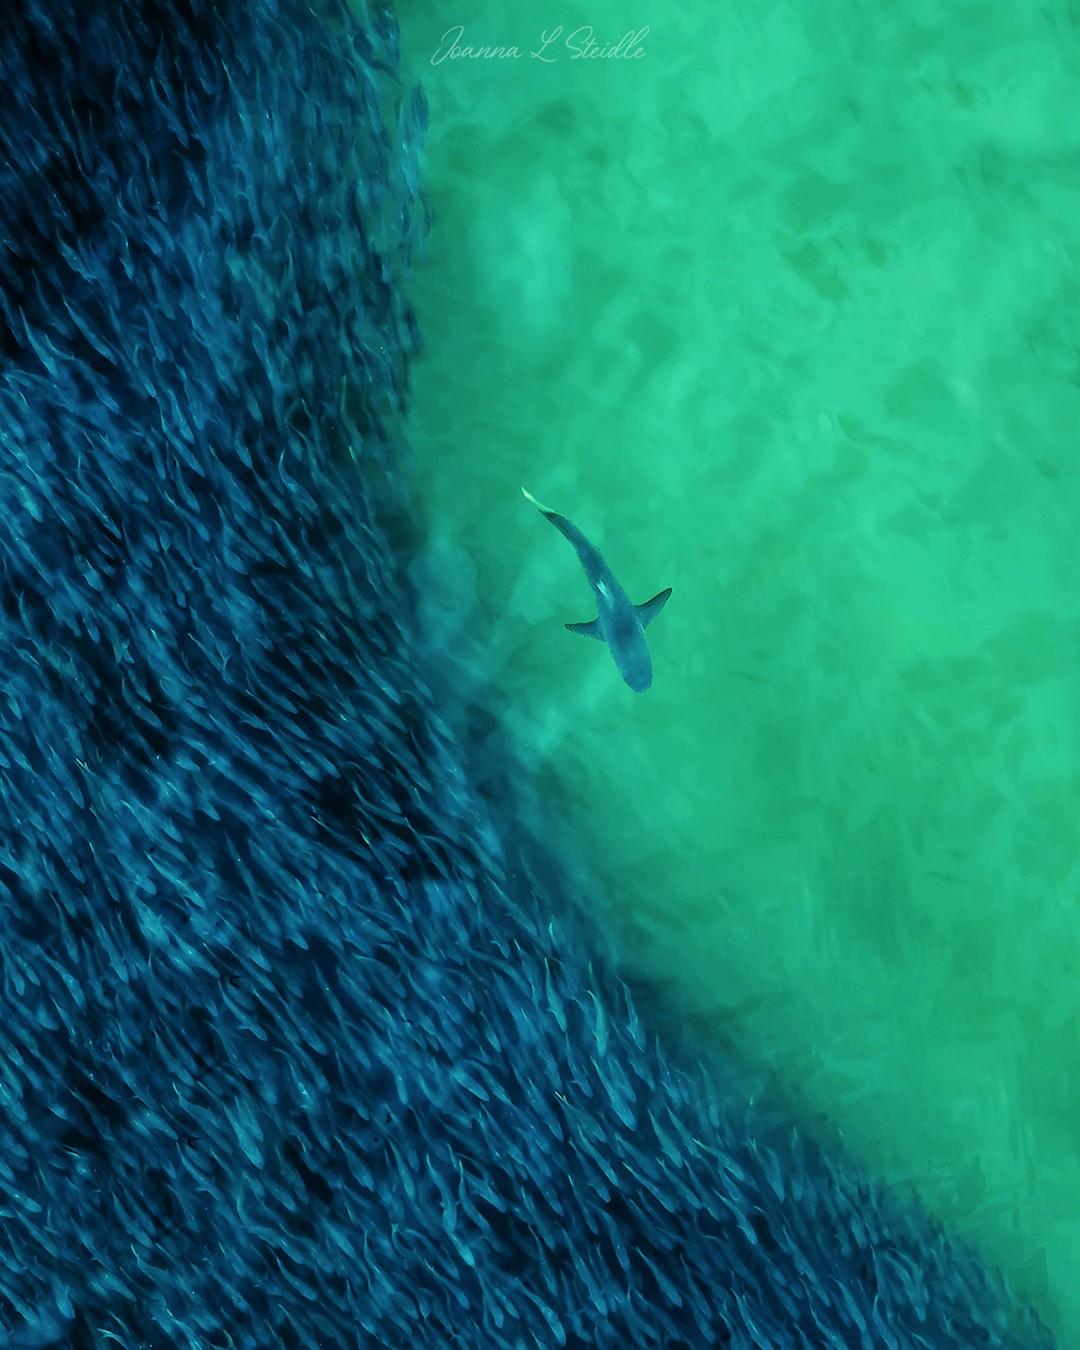 A shark moves a bait ball consisting of tens of thousands of bunker fish off the coast of Southampton, New York. (Courtesy of <a href="https://www.instagram.com/hamptonsdroneart/">Joanna L Steidle</a>)